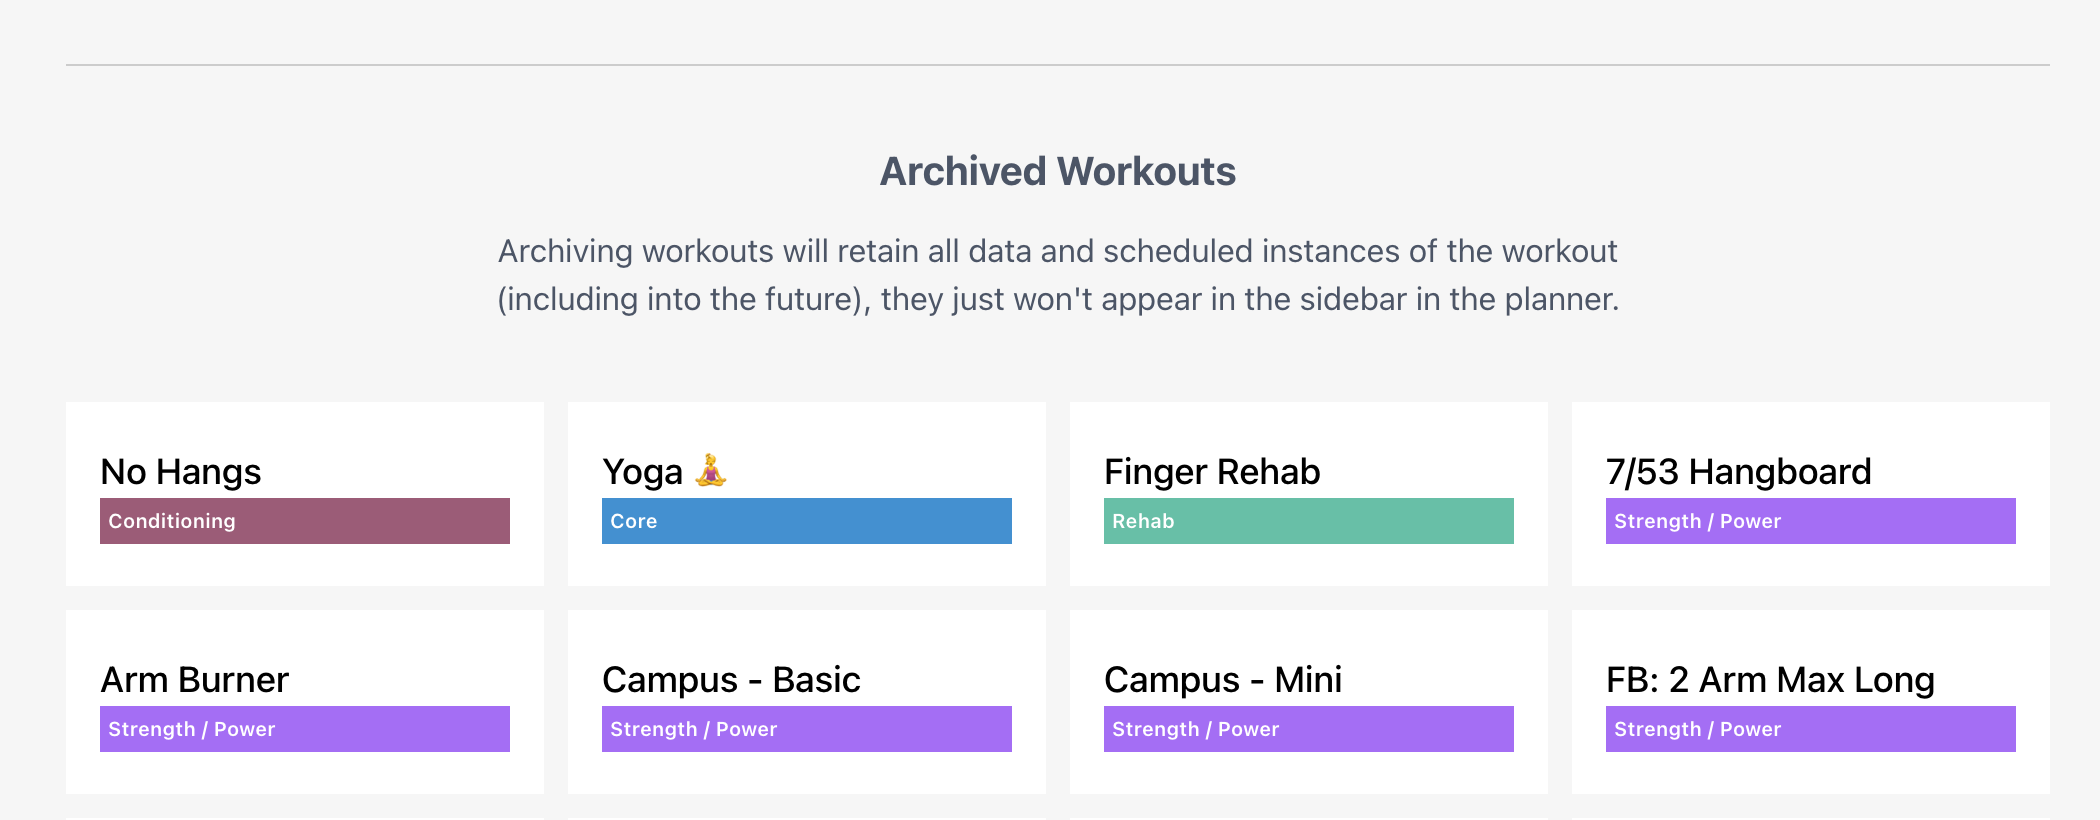 Archiving workouts 2